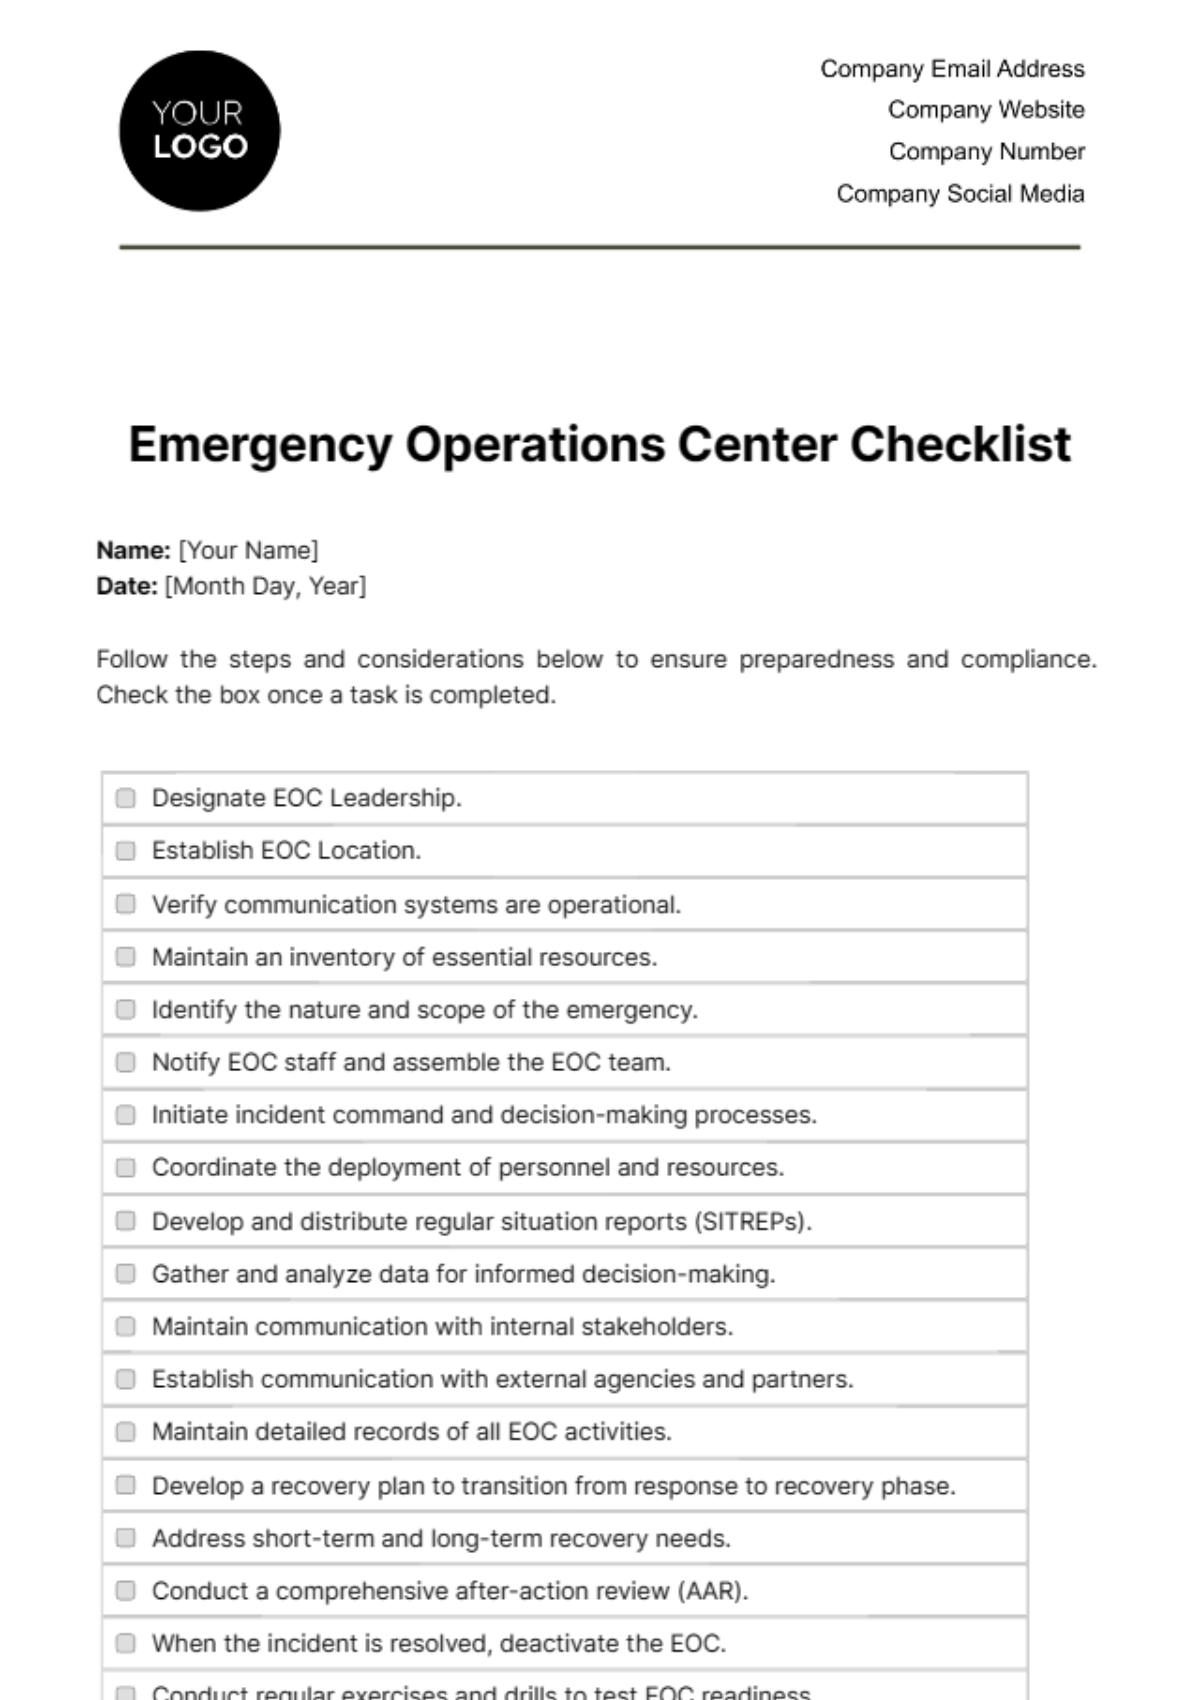 Free Emergency Operations Center Checklist Template